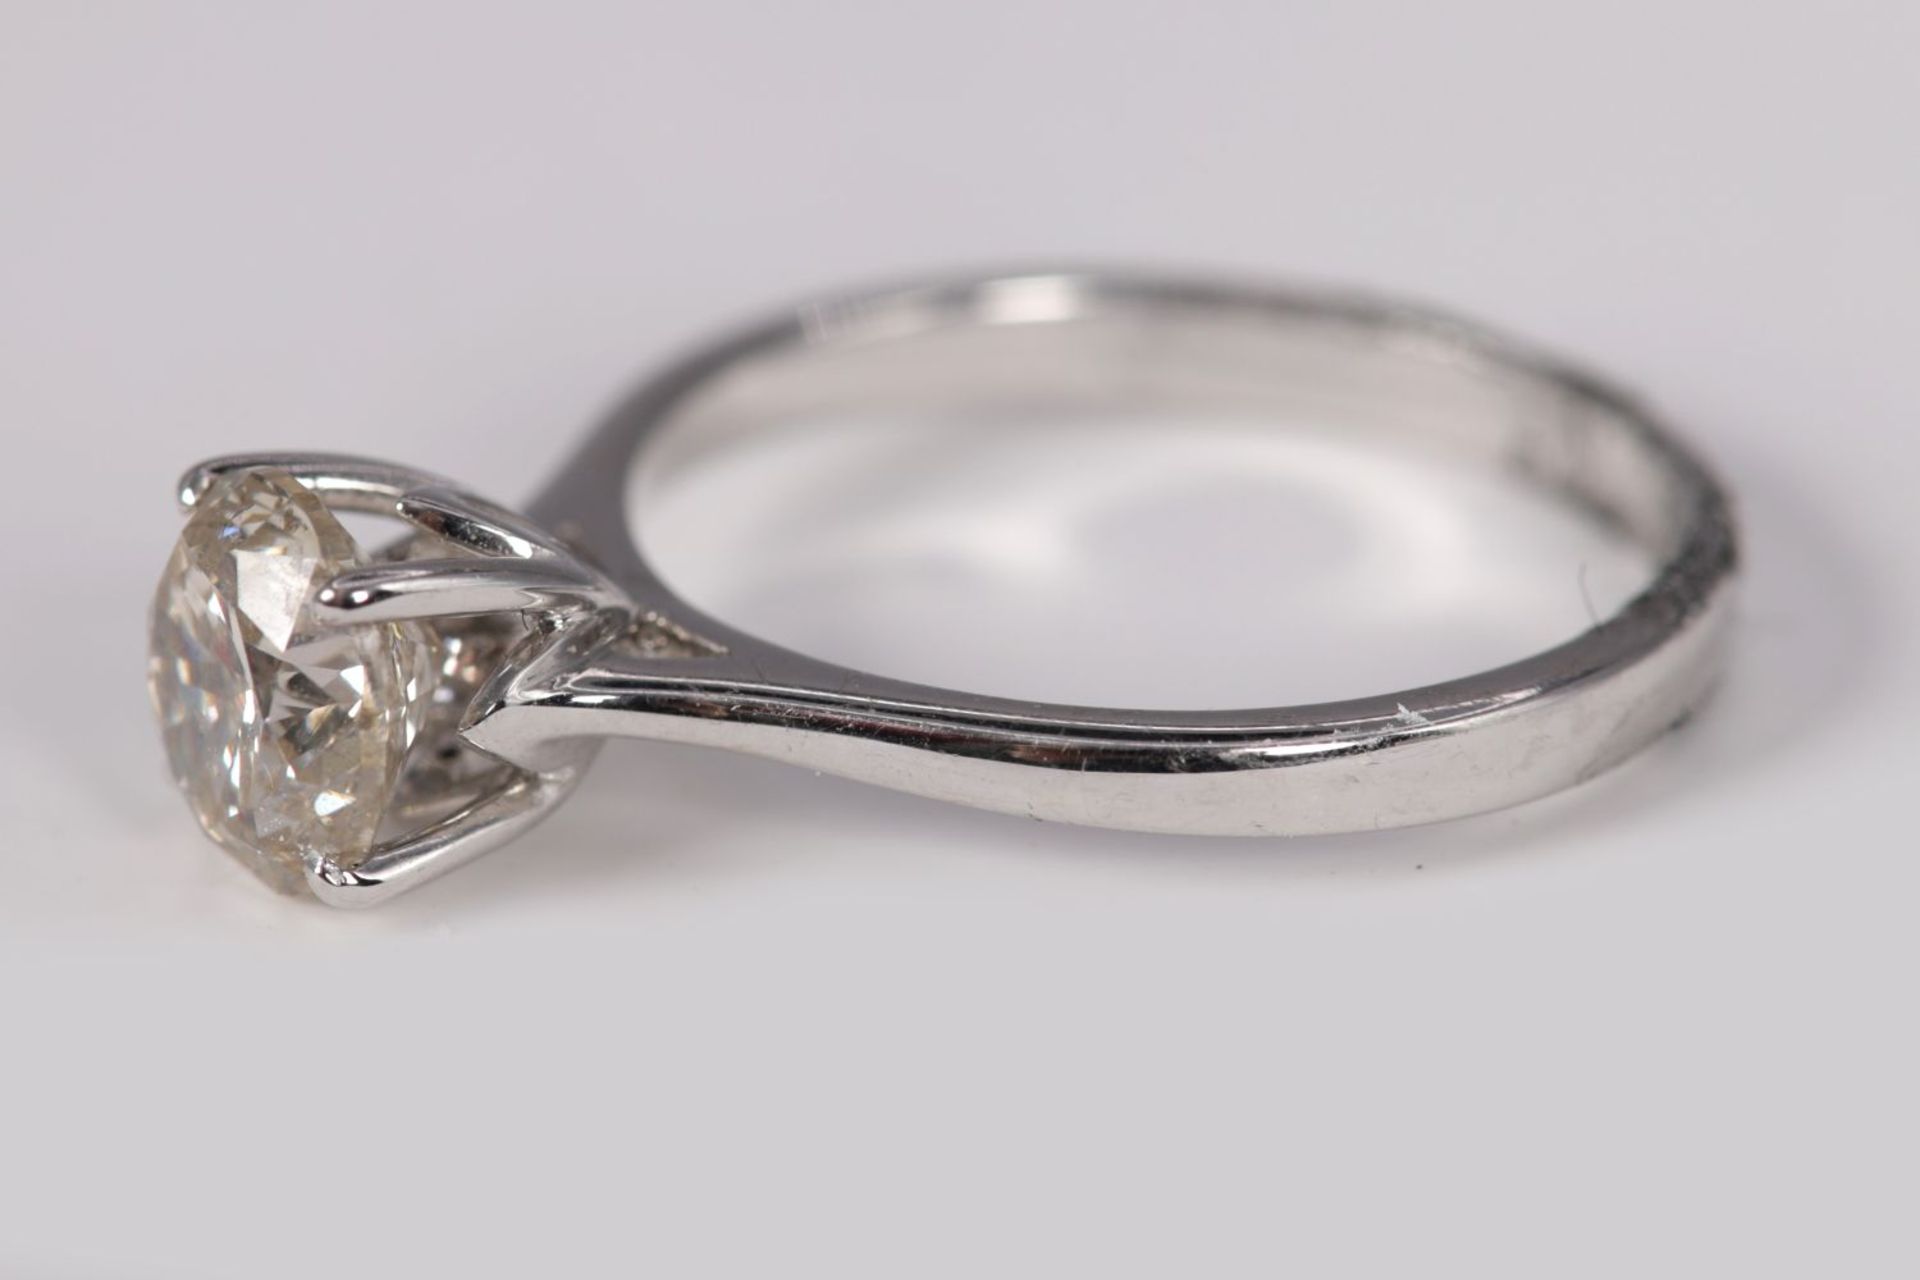 18K WHITE GOLD SOLITAIRE DIAMOND RING - Image 2 of 4